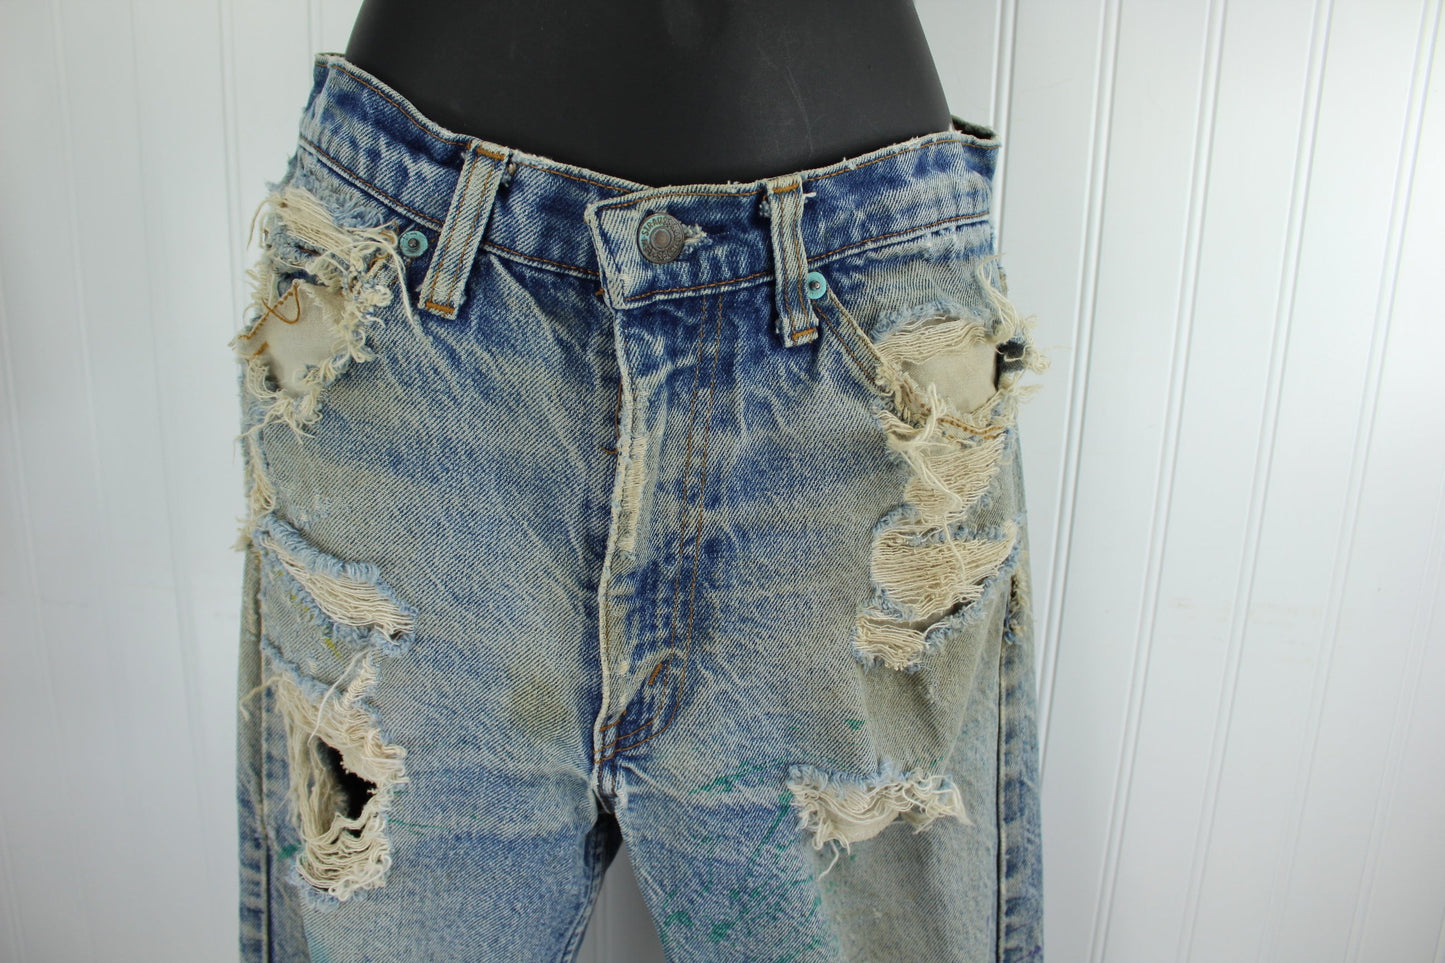 Vintage Levi's Skate Boarder Superbly Distressed Painted Jeans - Early 1990s - Waist 30" Orange Tab sustainable